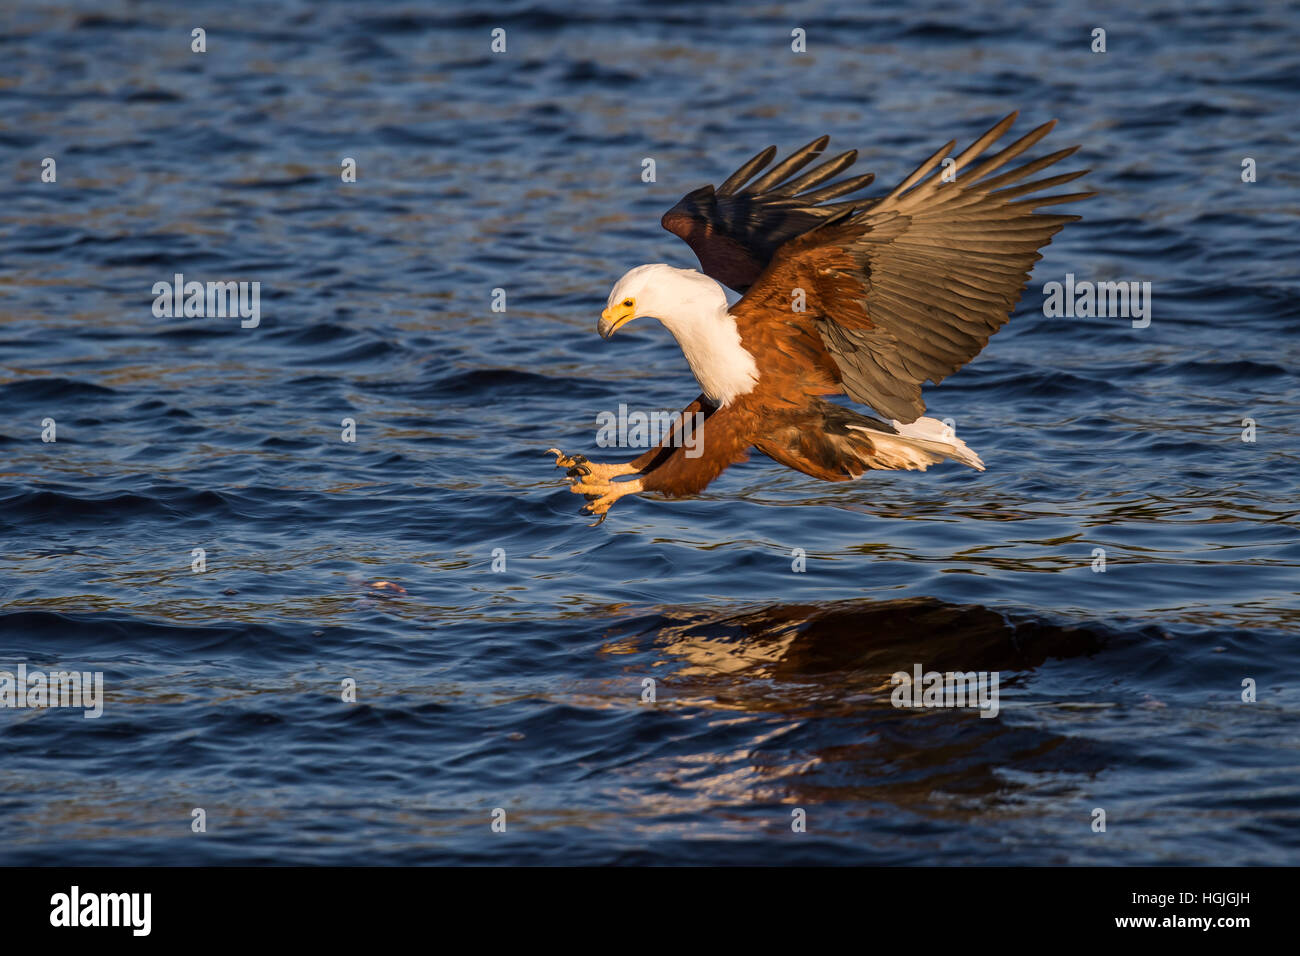 African fish eagle (Haliaeetus vocifer) when fishing with outstretched claws, Chobe River, Chobe National Park, Botswana Stock Photo